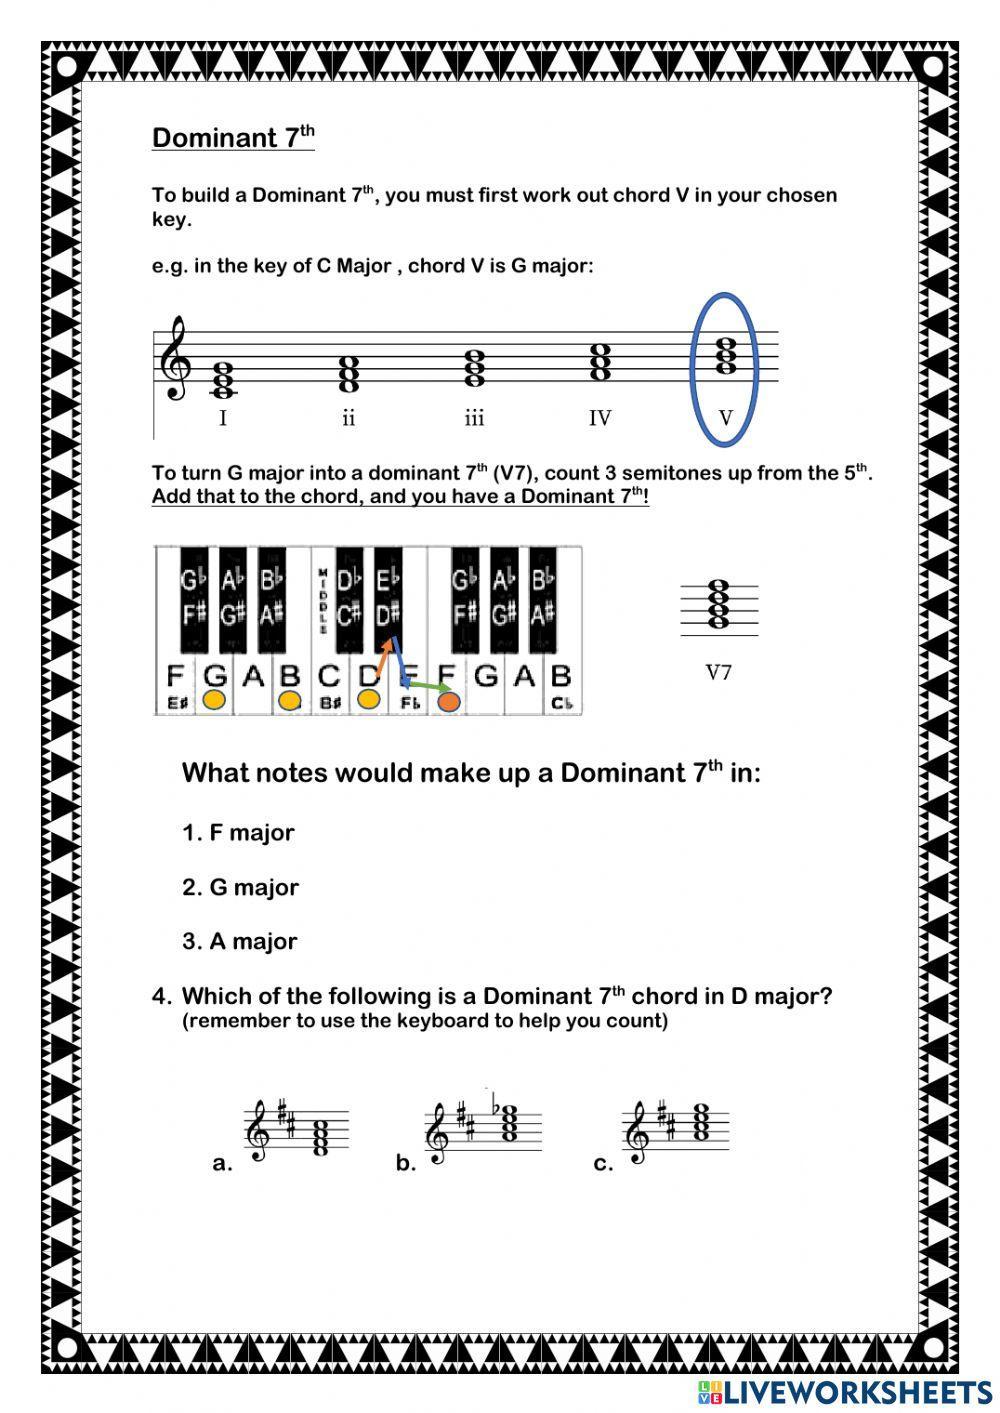 Higher Special Chords 2 of 2